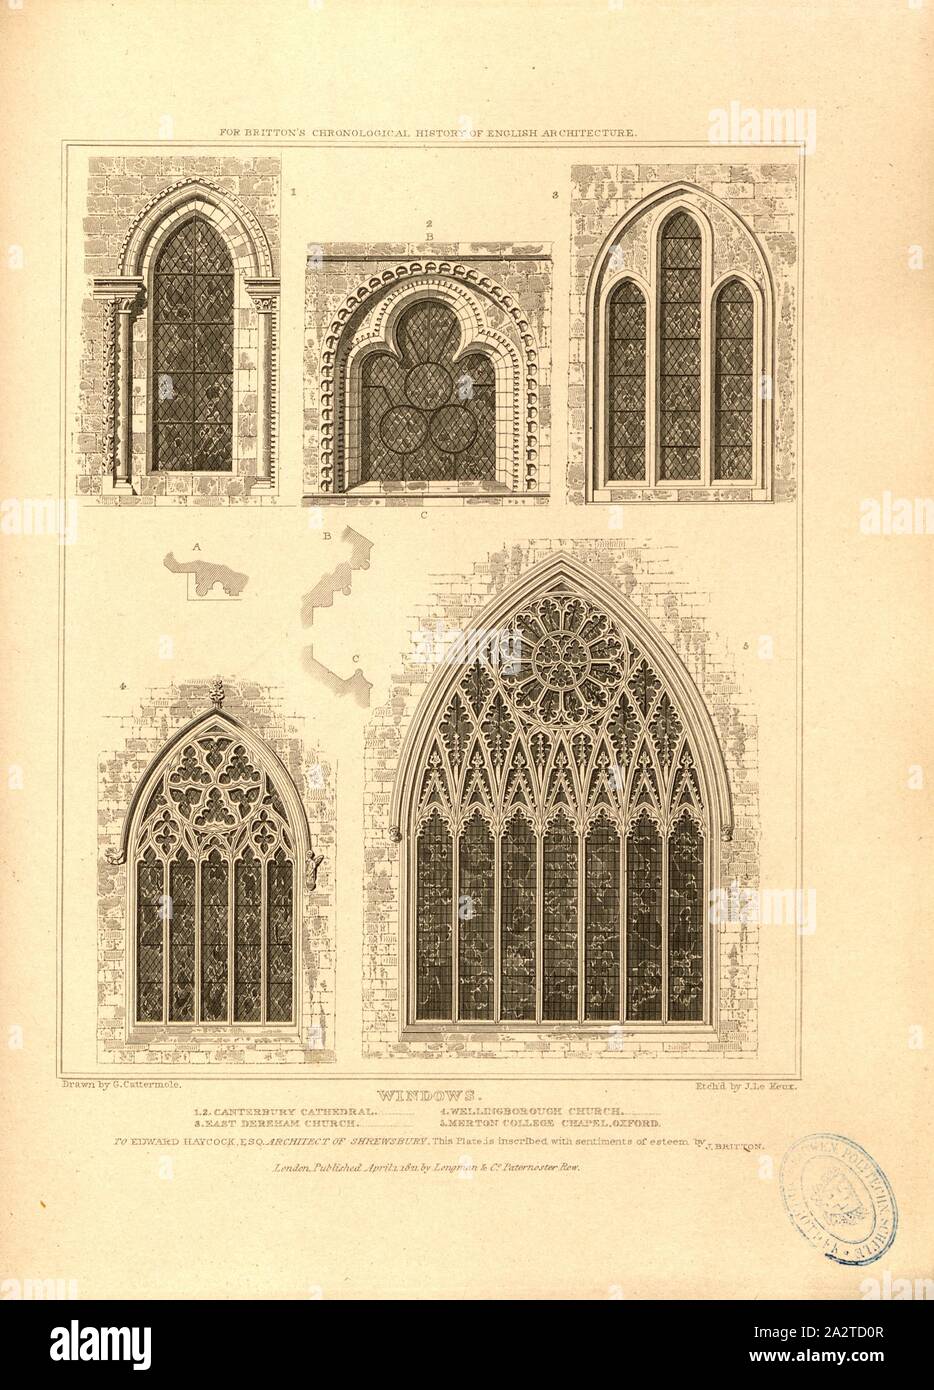 Windows: 1.2. Canterbury Cathedral, 3. East Dereham Church, 4. Wellingborough Church, 5. Merton College Chapel, Oxford, Various stained-glass windows, signed: Drawn by G. Cattermole; Etch'd by J. Le Keux; Published by Longman & Co, Fig. 75, after p. 260, Cattermole, George (drawing); Keux, John Le (etching); Longman & Co. (published), 1821, John Britton: The architectural antiquities of Great Britain: represented and illustrated in a series of views, elevations, plans, sections and details of various ancient English edifices: with historical and descriptive accounts of each. Bd. 5. London: J Stock Photo